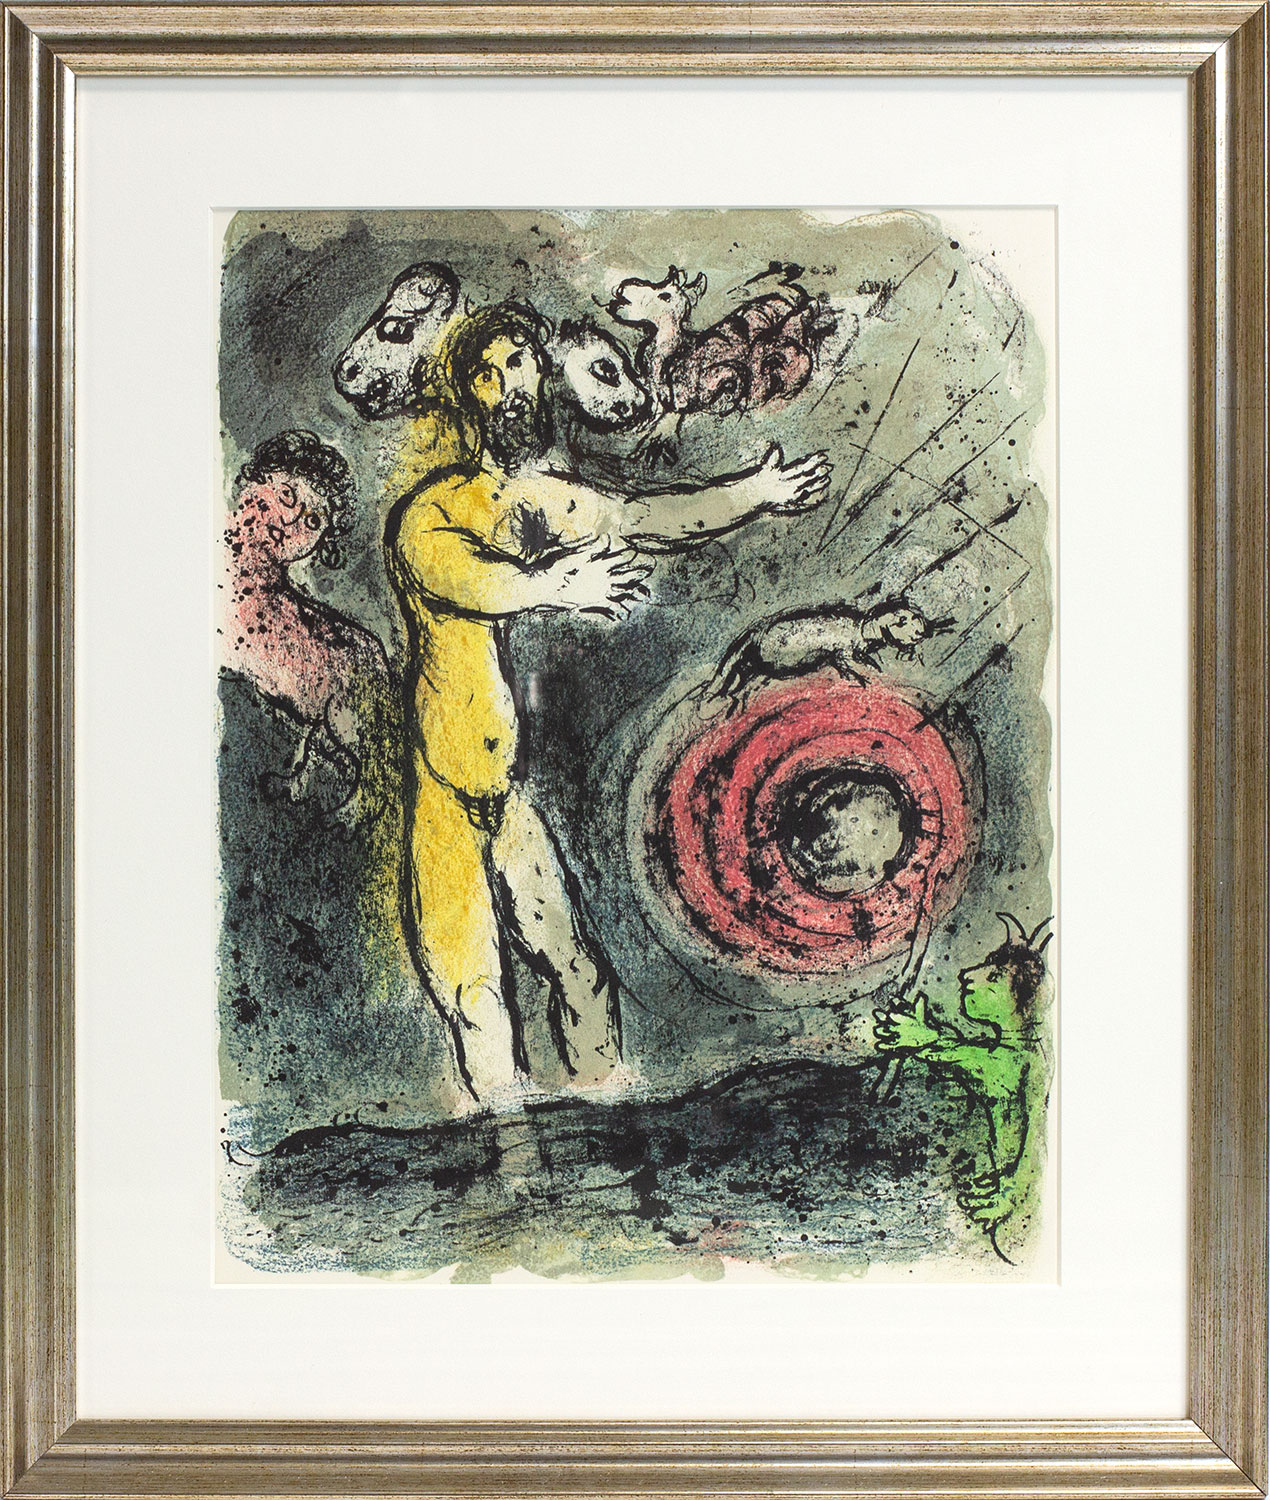 Picture "The Odyssey - Proteus" (1989), framed by Marc Chagall